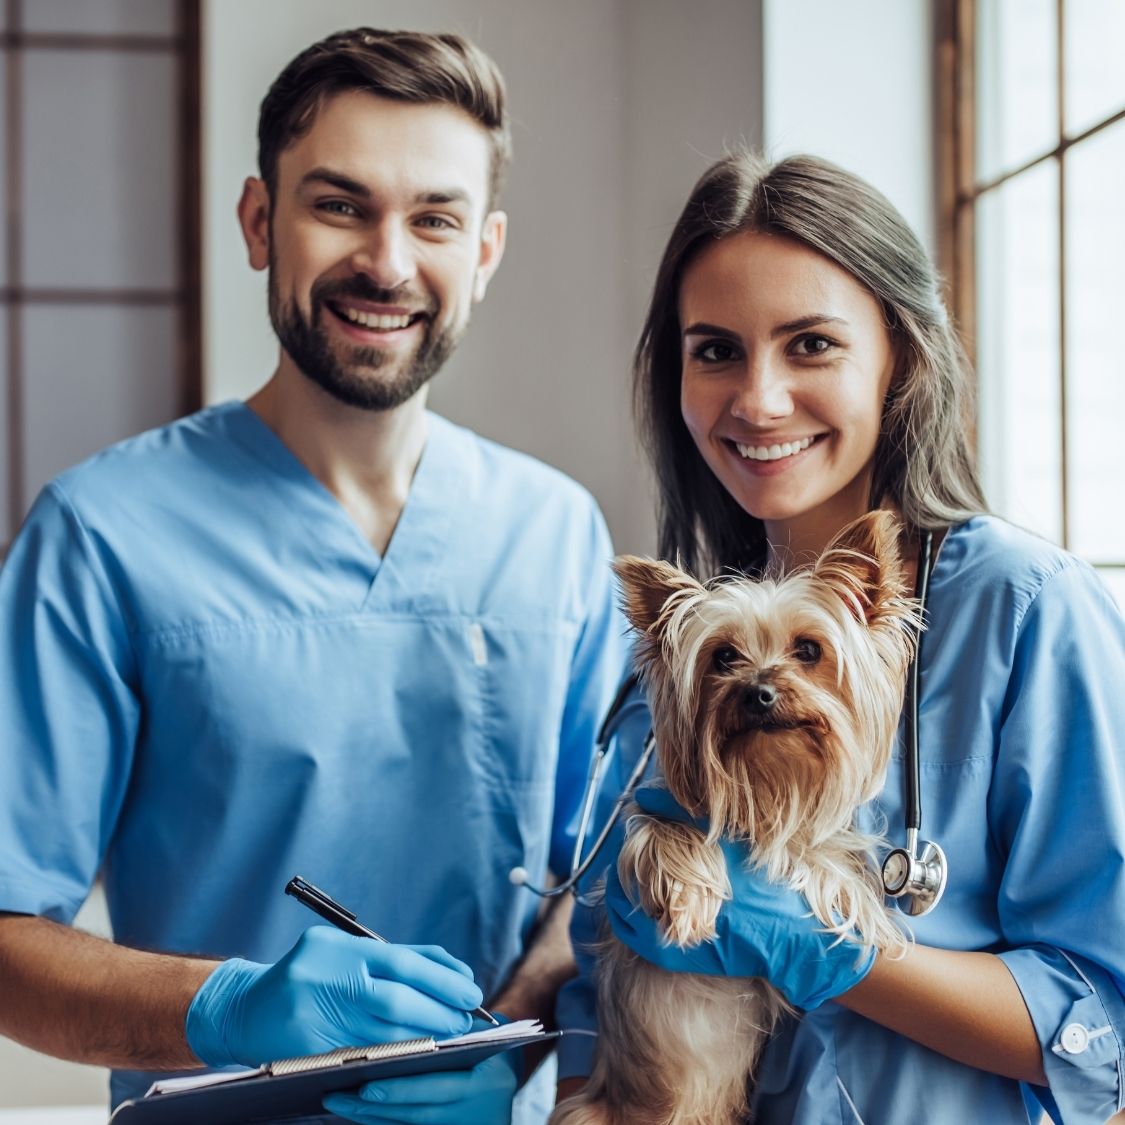 Ways To Improve Client Retention at Your Veterinary Clinic